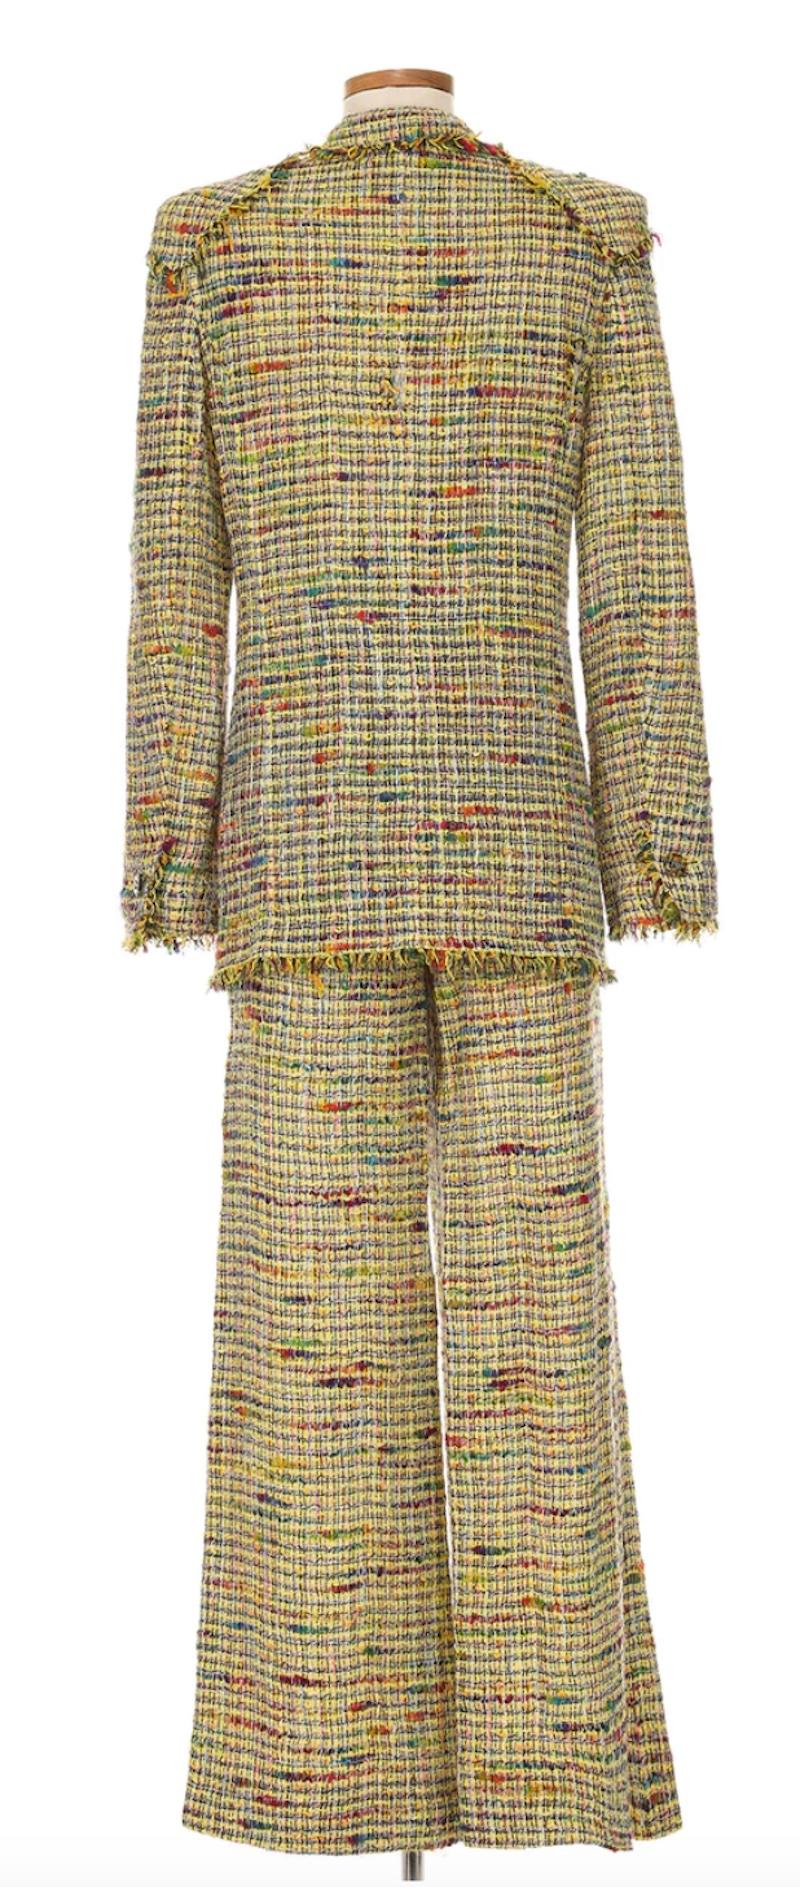 Chanel by Karl Lagerfeld Blazer Jacket and Flare Pants

- Spring 1998 Runway Collection

- Vibrant multicolored tweed in woven hues of Yellow, Red, Blue, Green

- Jacket buttons up the front and Pants side zip for closure

- A chic day to night